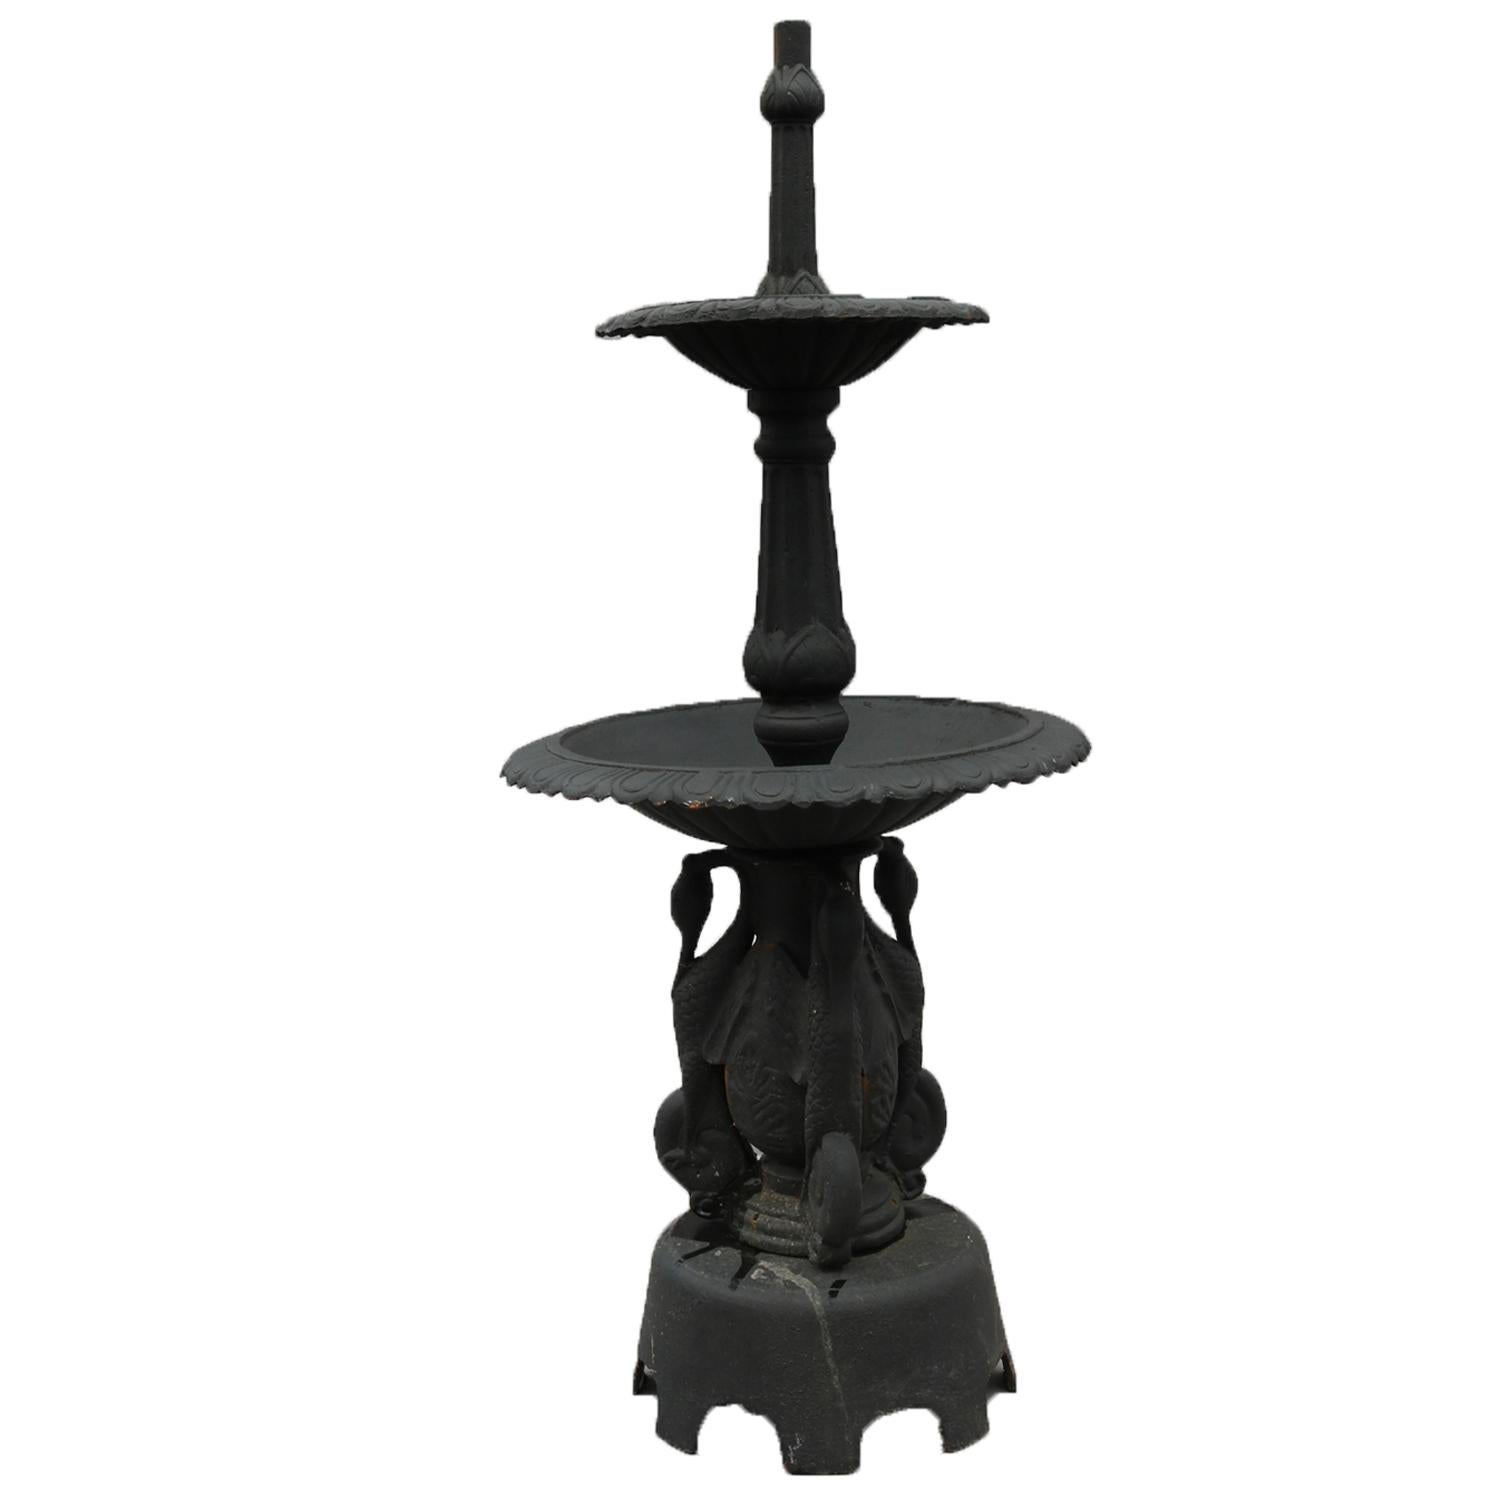 Victorian garden fountain features black painted cast iron construction with contemporary two tiers of scalloped bowls over base with three swans, 20th century.

Measures: 39